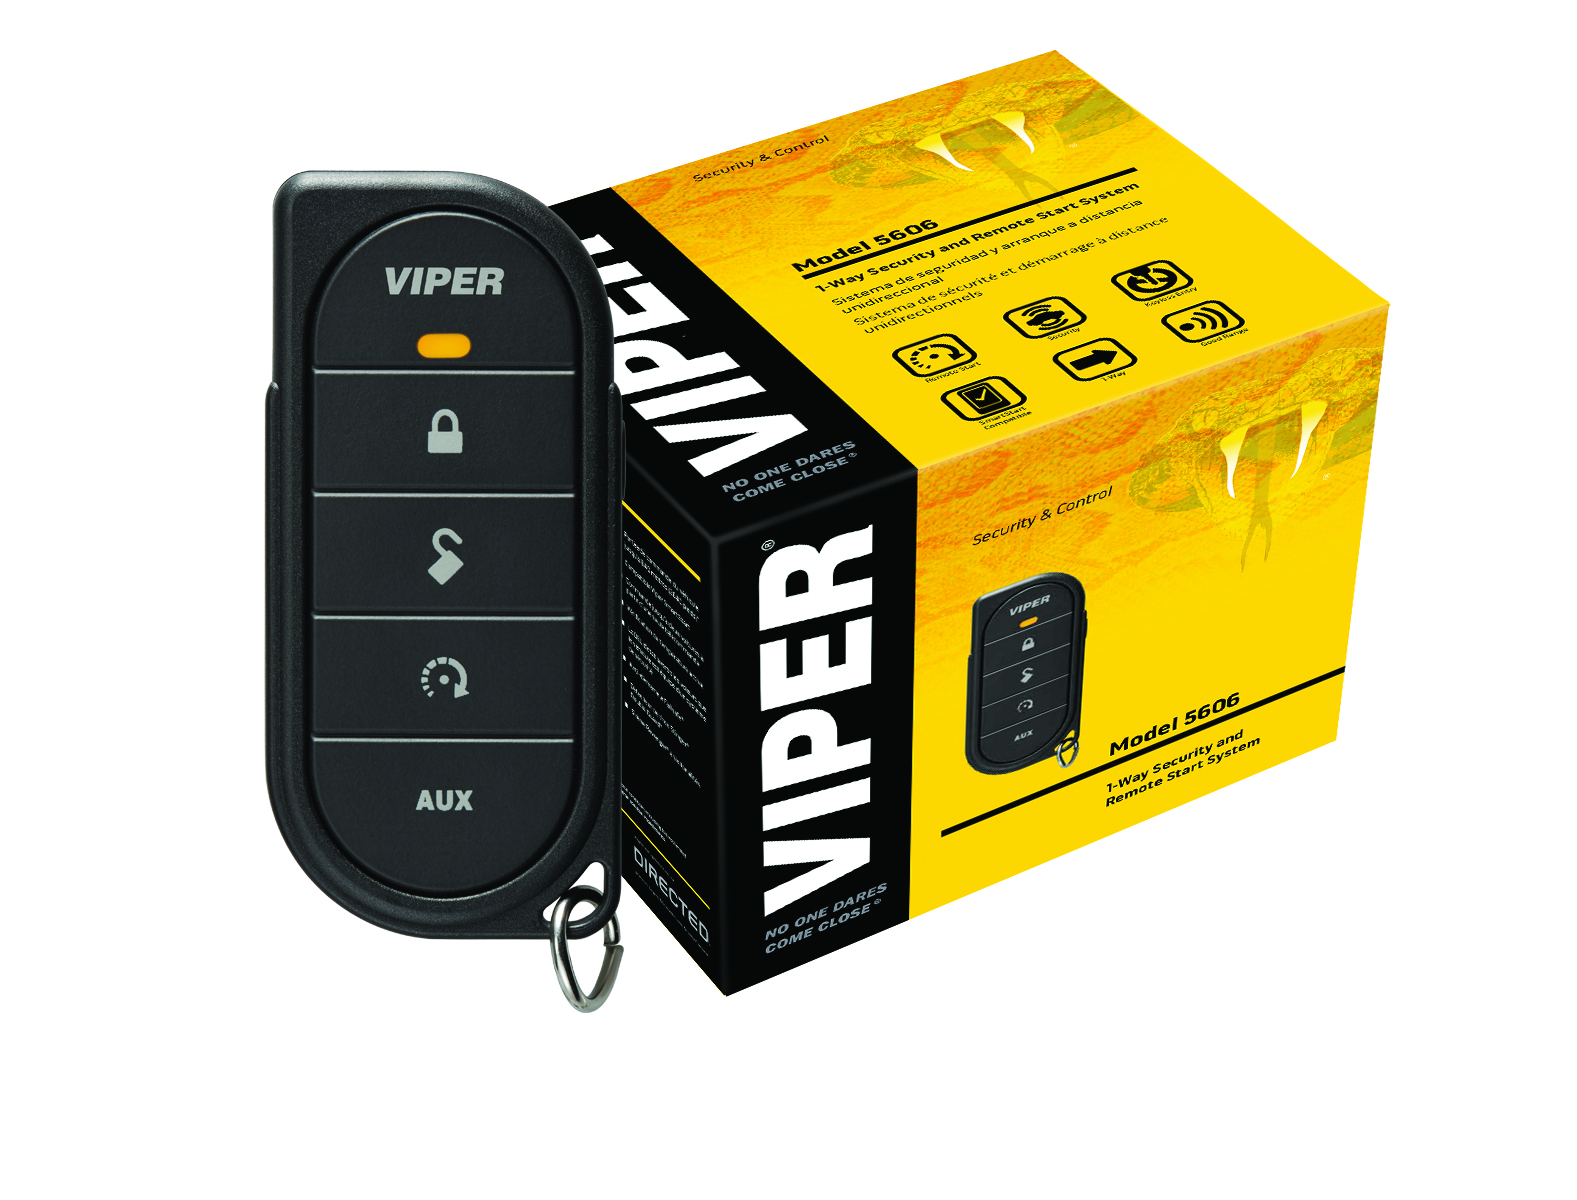 Viper 5606 | AudioWorks of Delaware | Turn It On! | Car Alarms - Remote